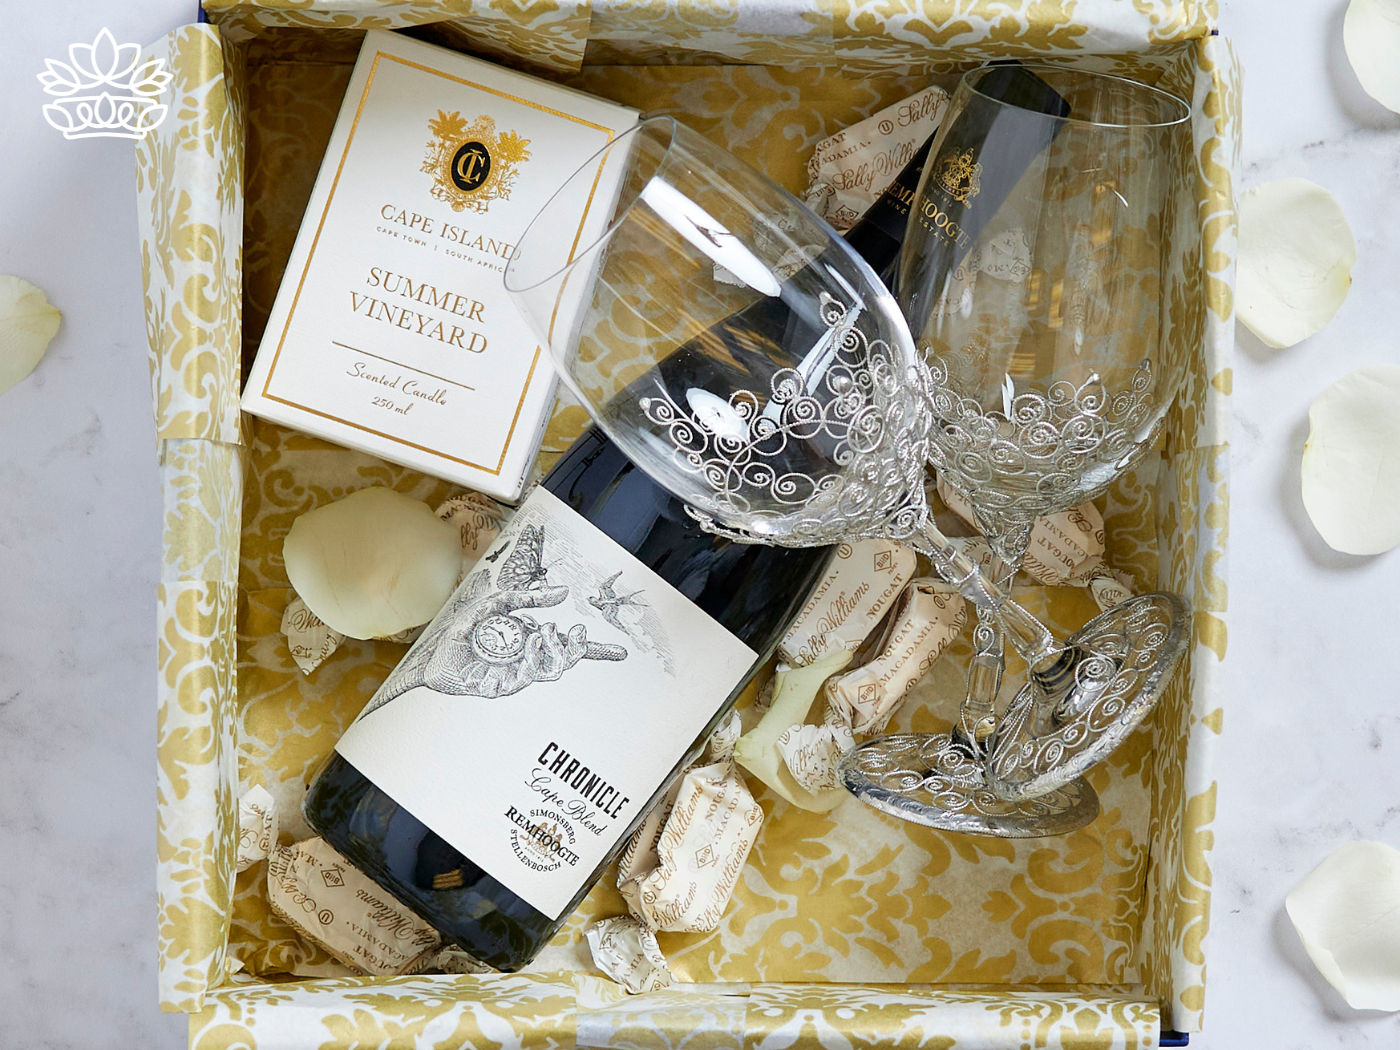 A beautifully arranged gift box containing a bottle of wine, two intricately designed wine glasses, a scented candle, and chocolates, set on patterned tissue paper with scattered rose petals. Fabulous Flowers and Gifts. Gift Boxes for Boyfriend. Delivered with Heart.